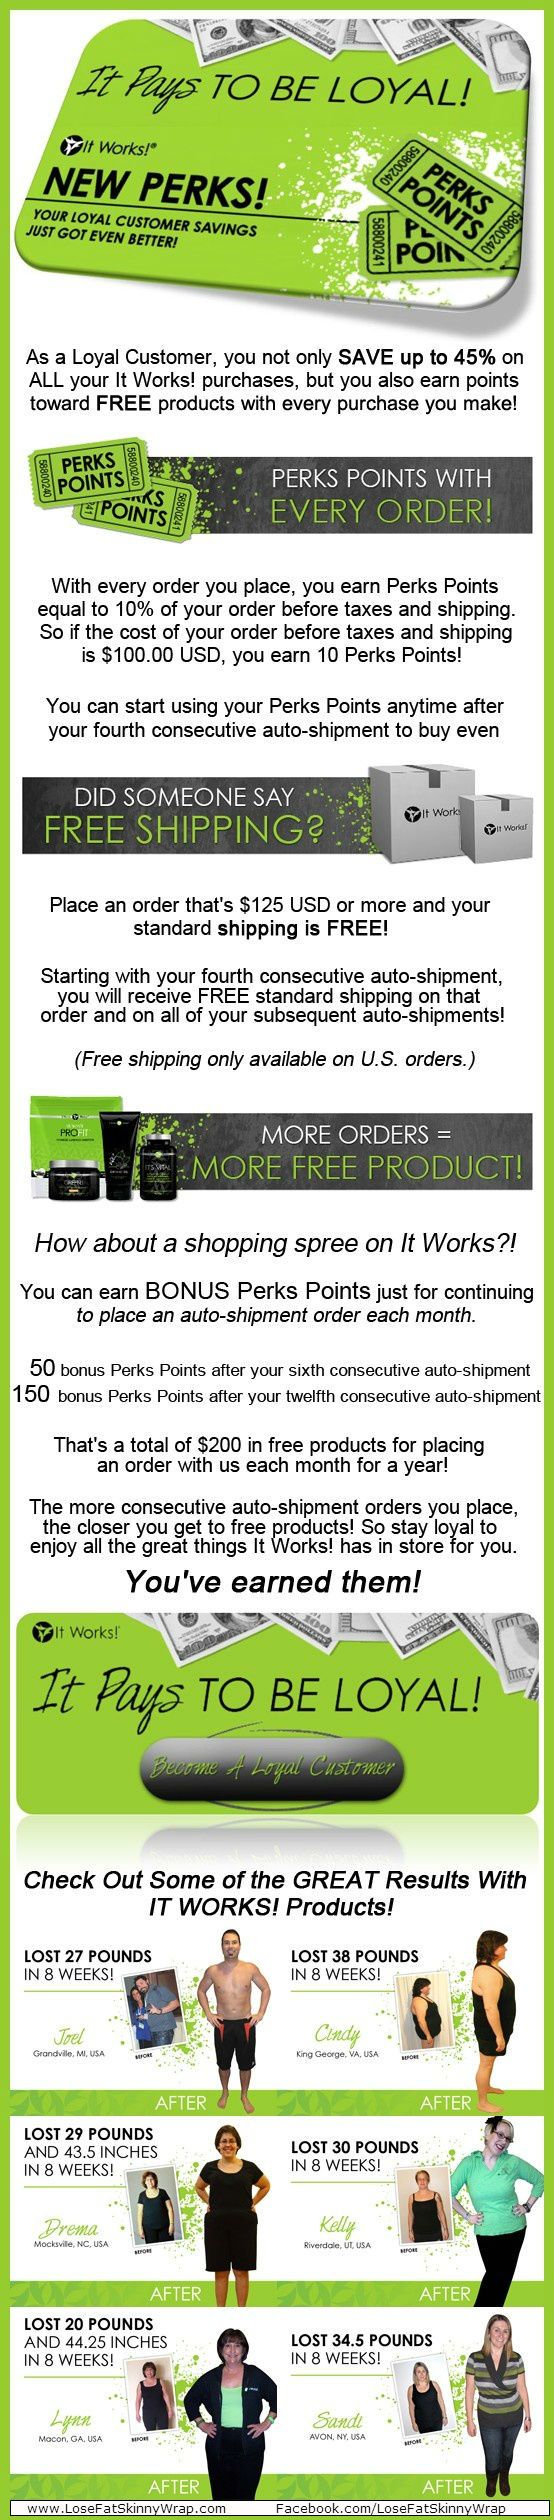 Want more info about being a Loyal Customer for It Works Global.. Here ya go. Co